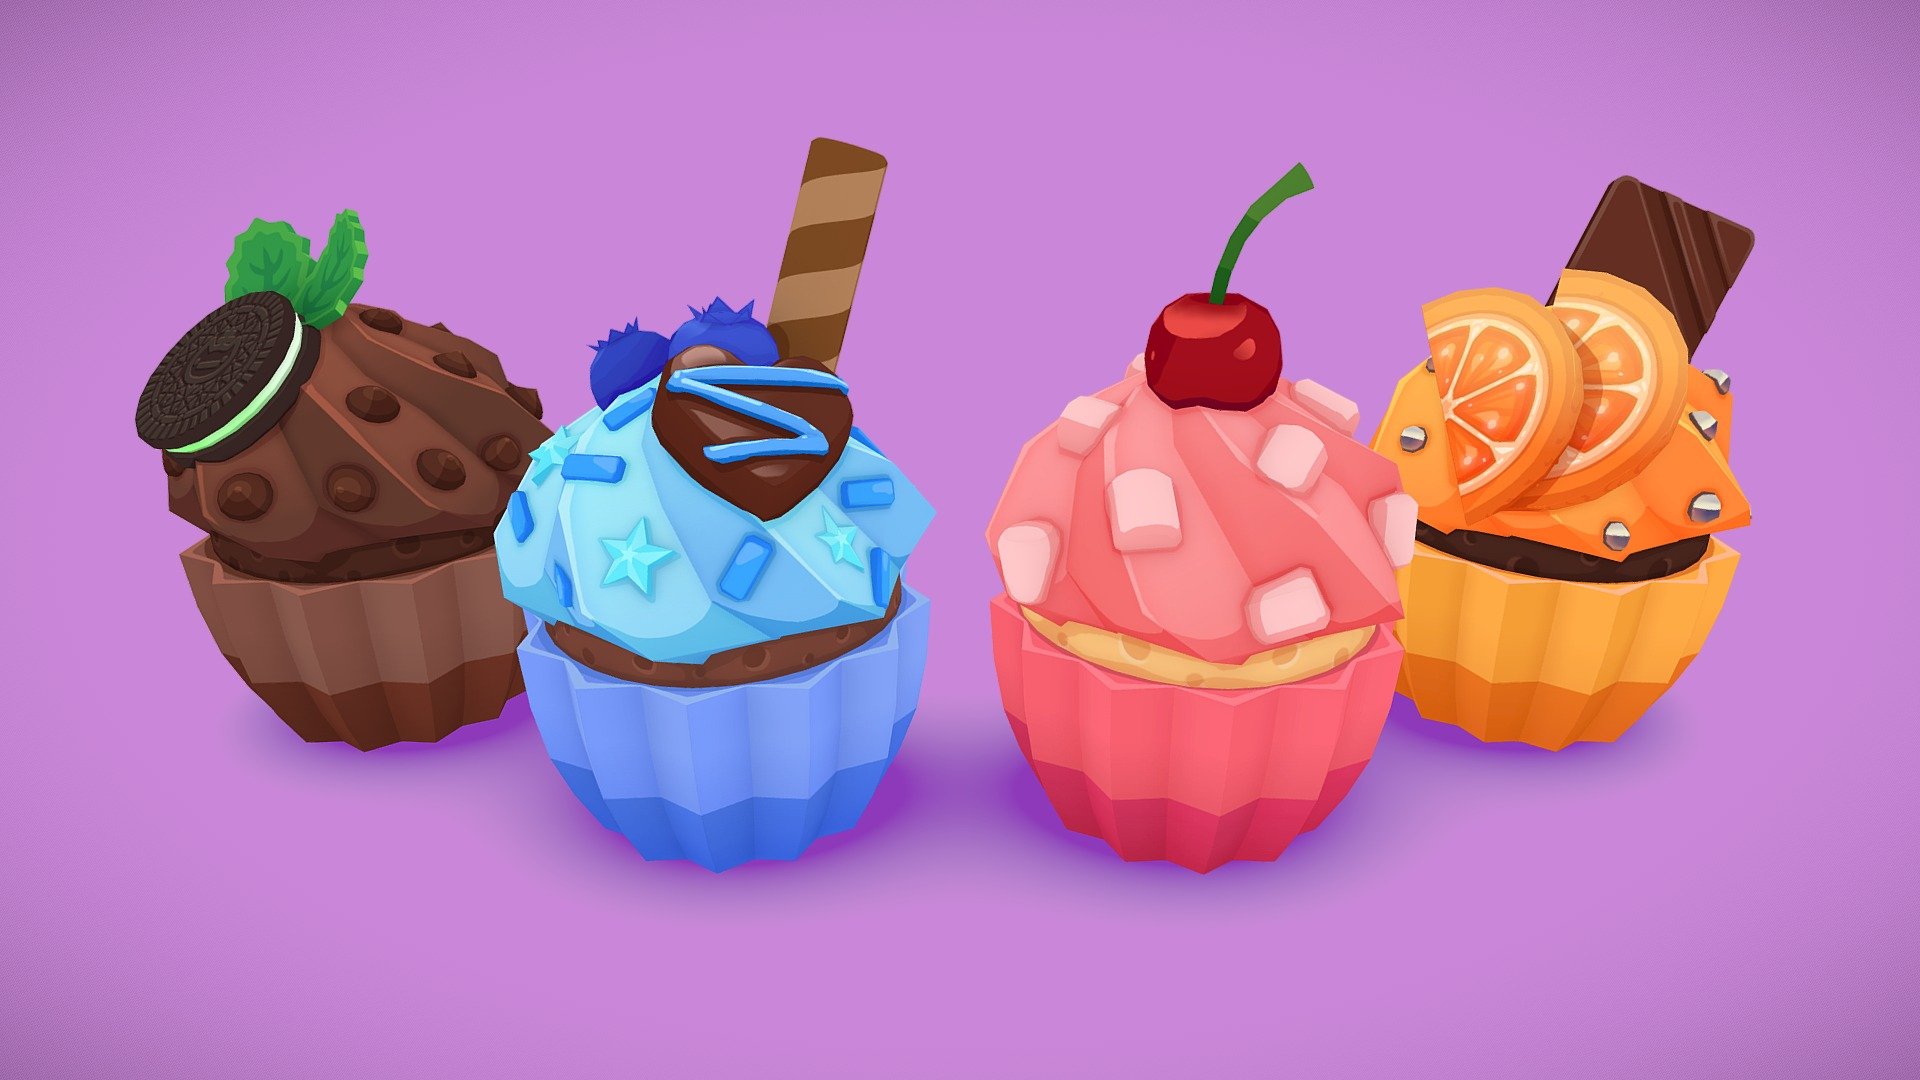 I've started learning Blender and this was a good starting set of models to make! For some reason I keep gravitating towards making colourful food models.... I might be hungry 😅

Heavily inspired by https://www.artstation.com/artwork/YaYKNY by Ebru Gumustas (especially the base cupcake and texturing style), but all of the cupcakes are my own design and modelled from scratch in Blender. Textured in Substance Painter 3d model